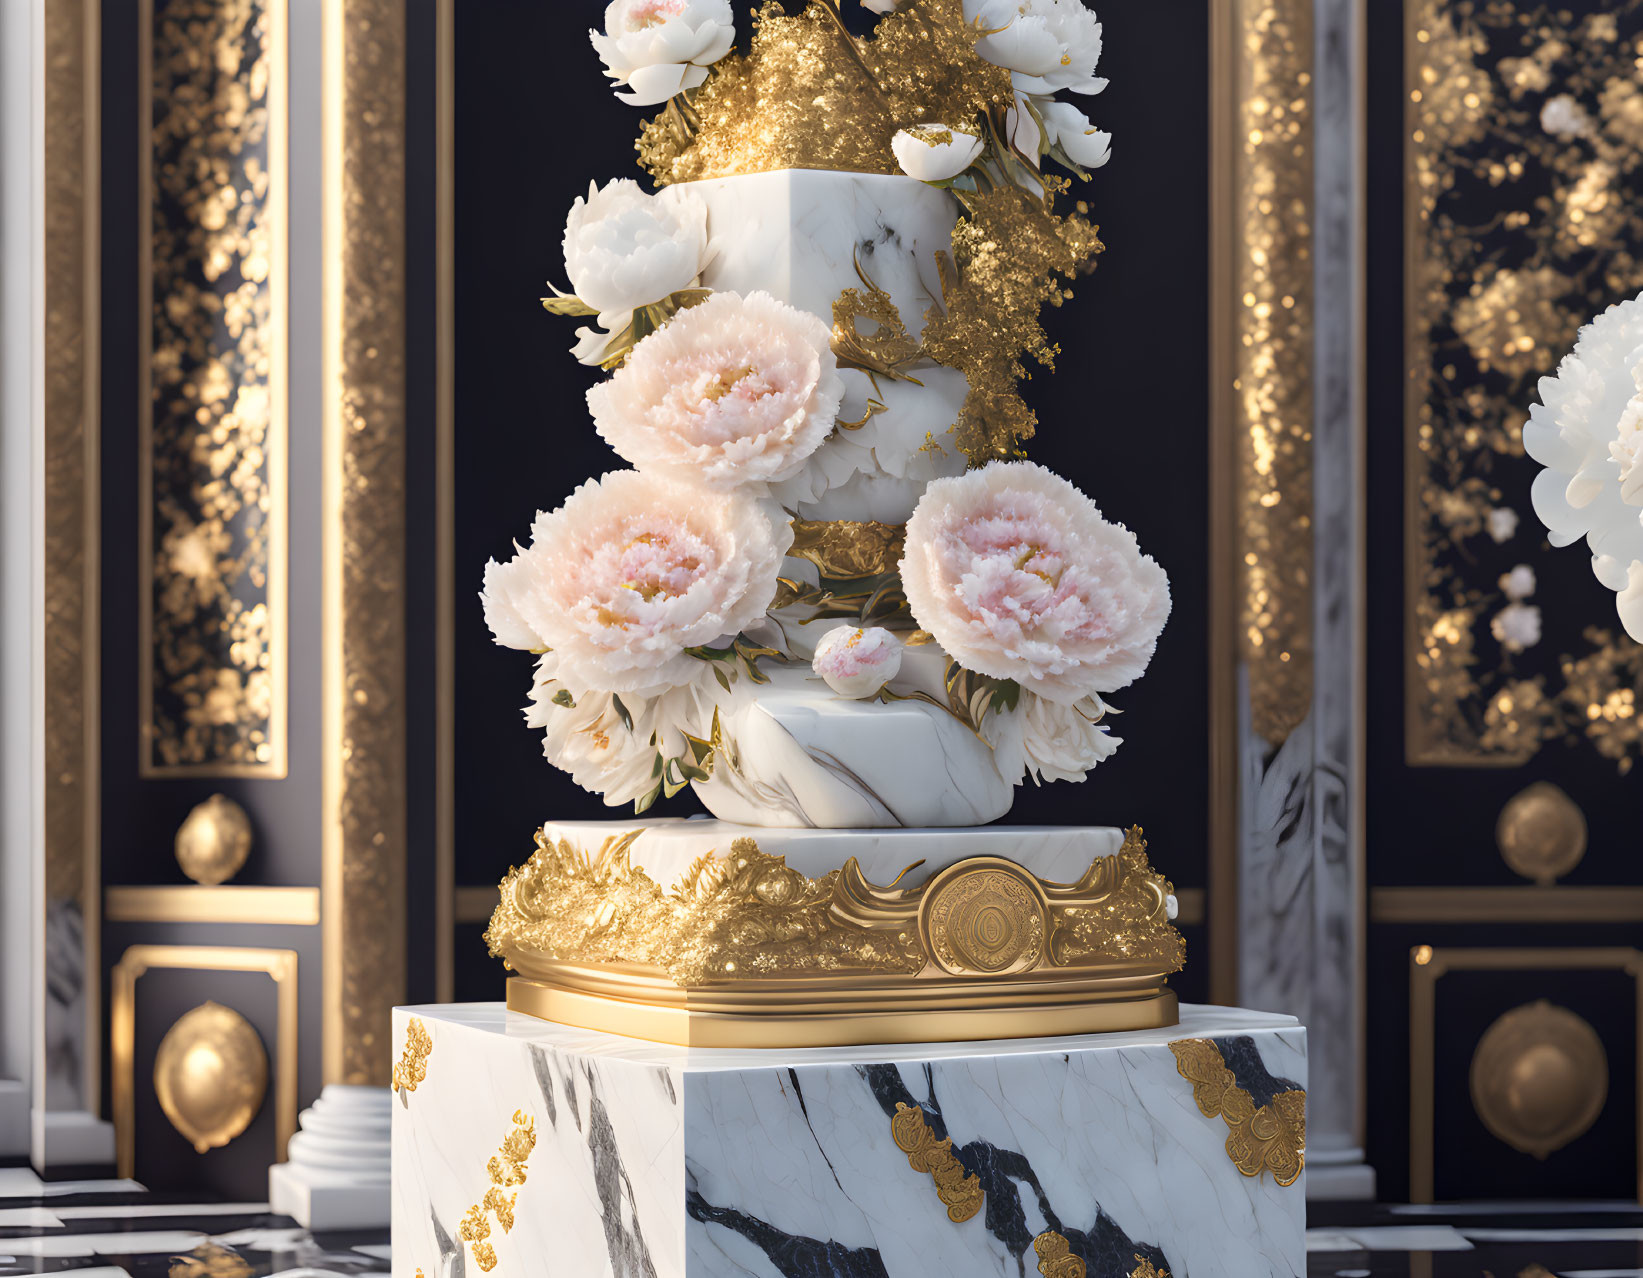 Elegant multi-tiered white and gold cake with peonies and gold leaf decorations on marble and